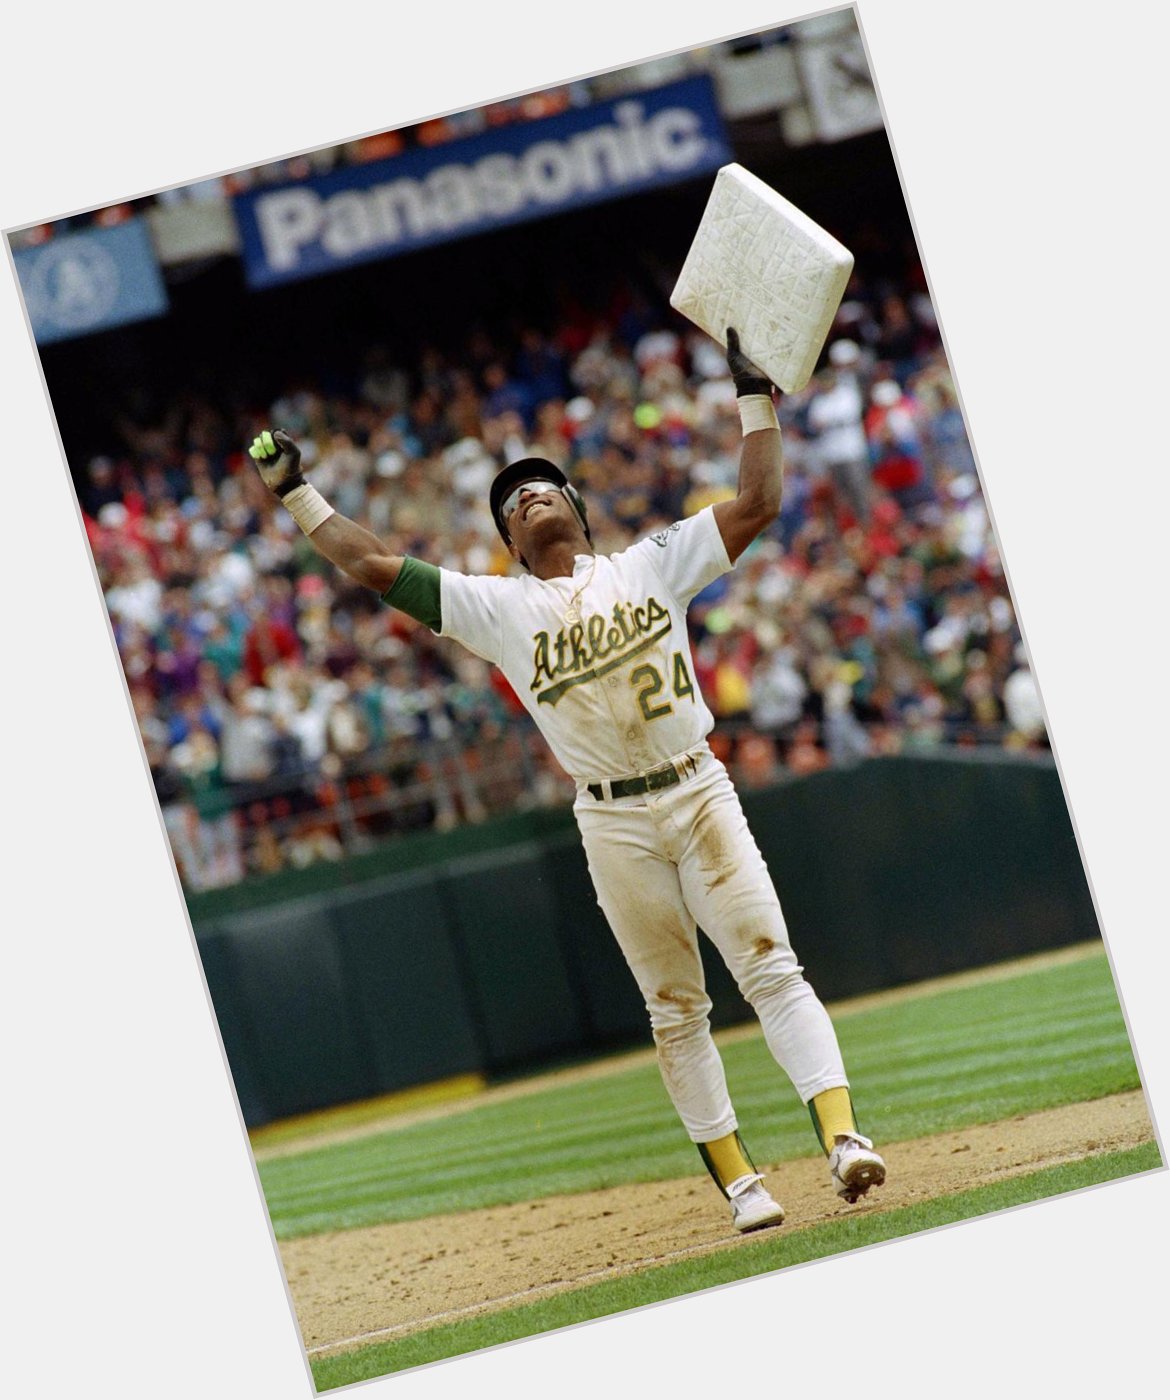 Happy birthday to the guy who knows how to steal bases like it\s nobody\s business, Rickey Henderson! 